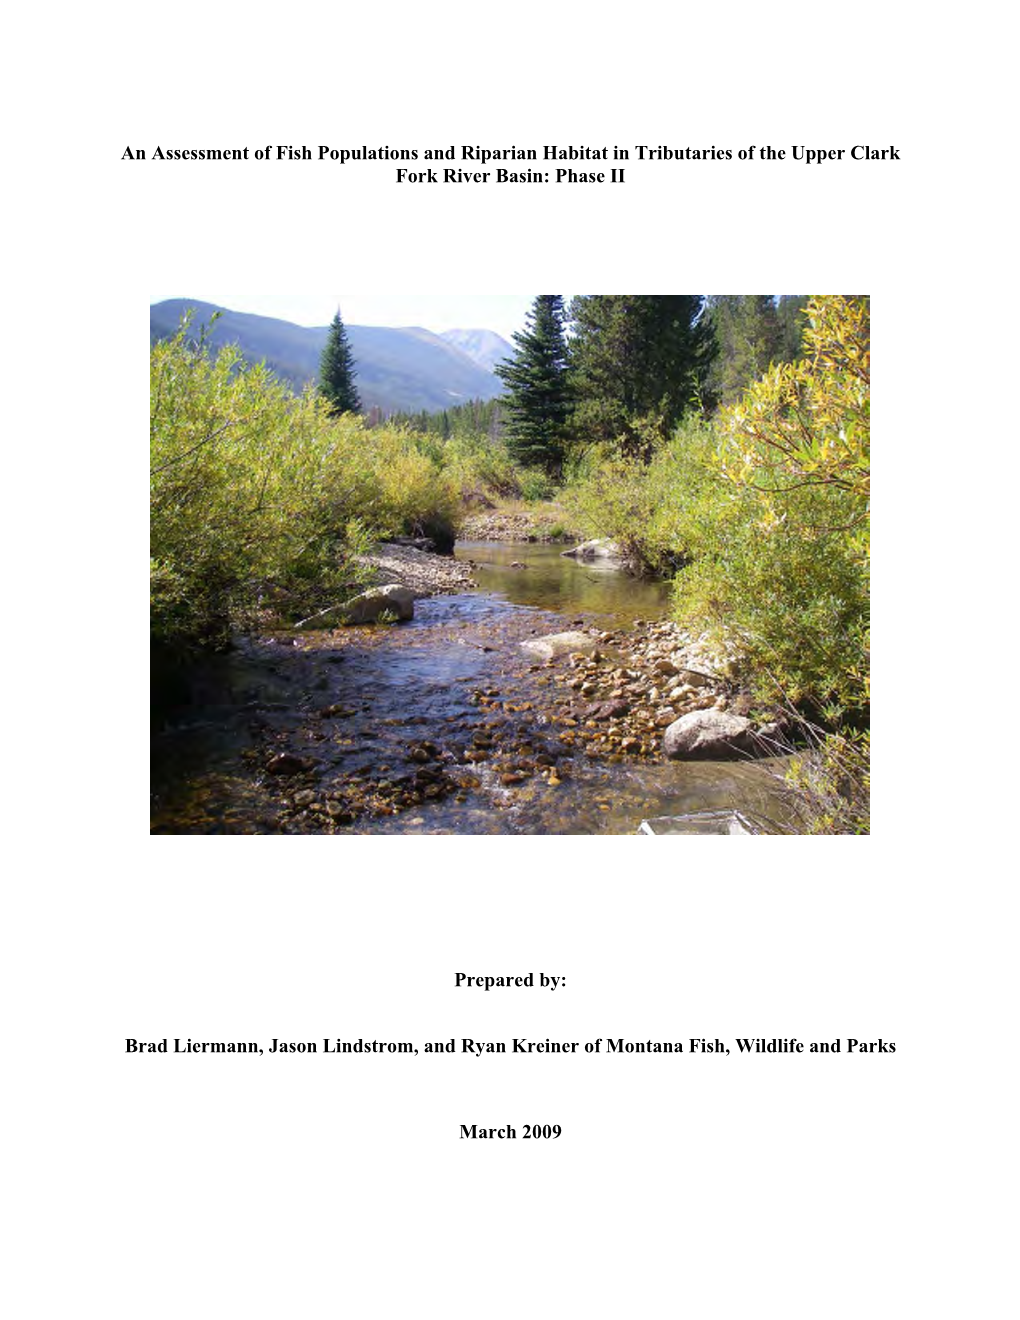 An Assessment of Fish Populations and Riparian Habitat in Tributaries of the Upper Clark Fork River Basin: Phase II